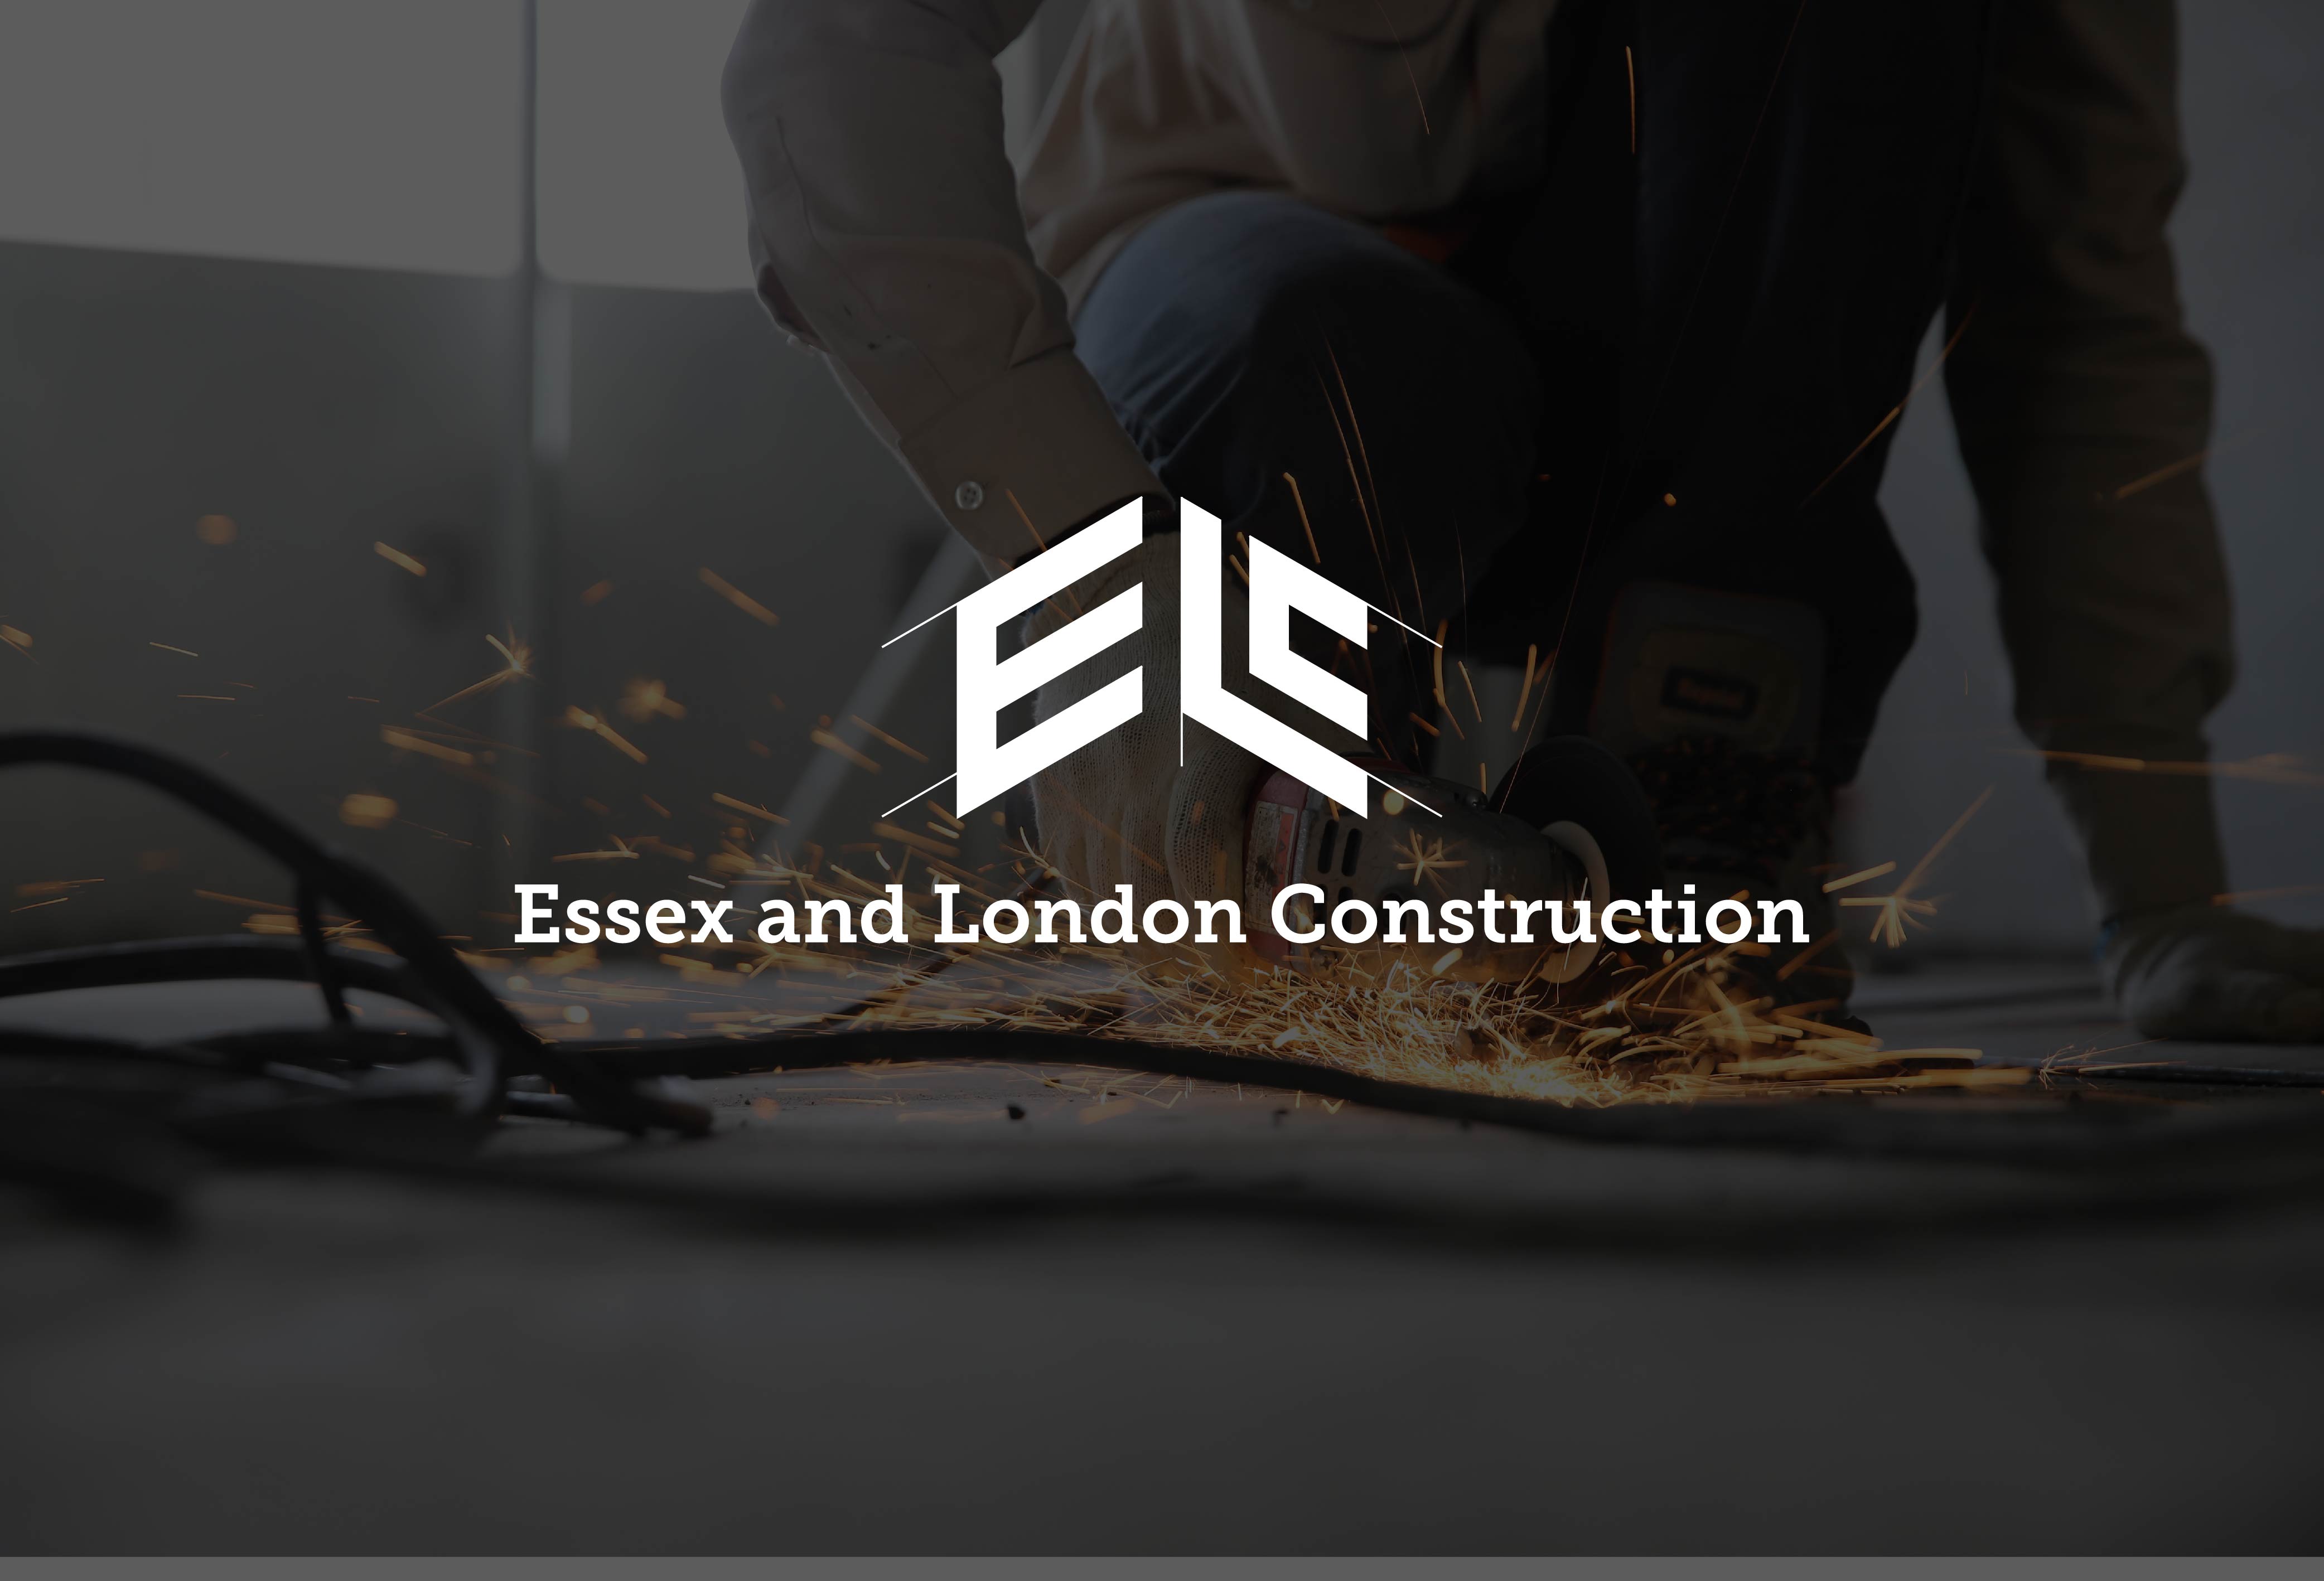 Logo of Essex and London Construction